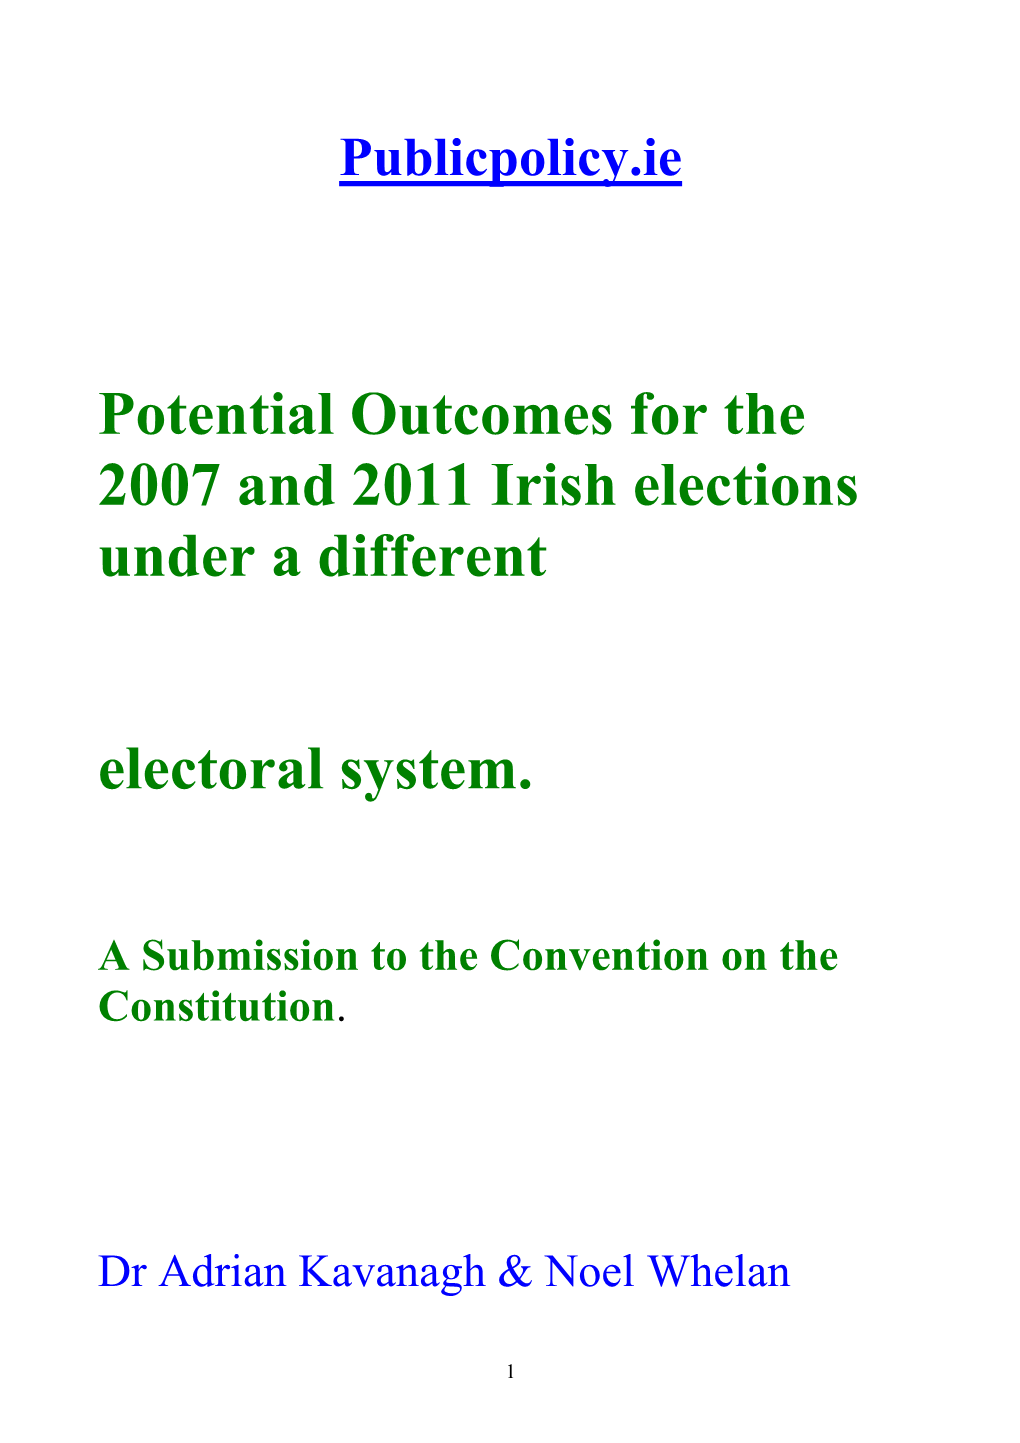 Potential Outcomes for the 2007 and 2011 Irish Elections Under a Different Electoral System